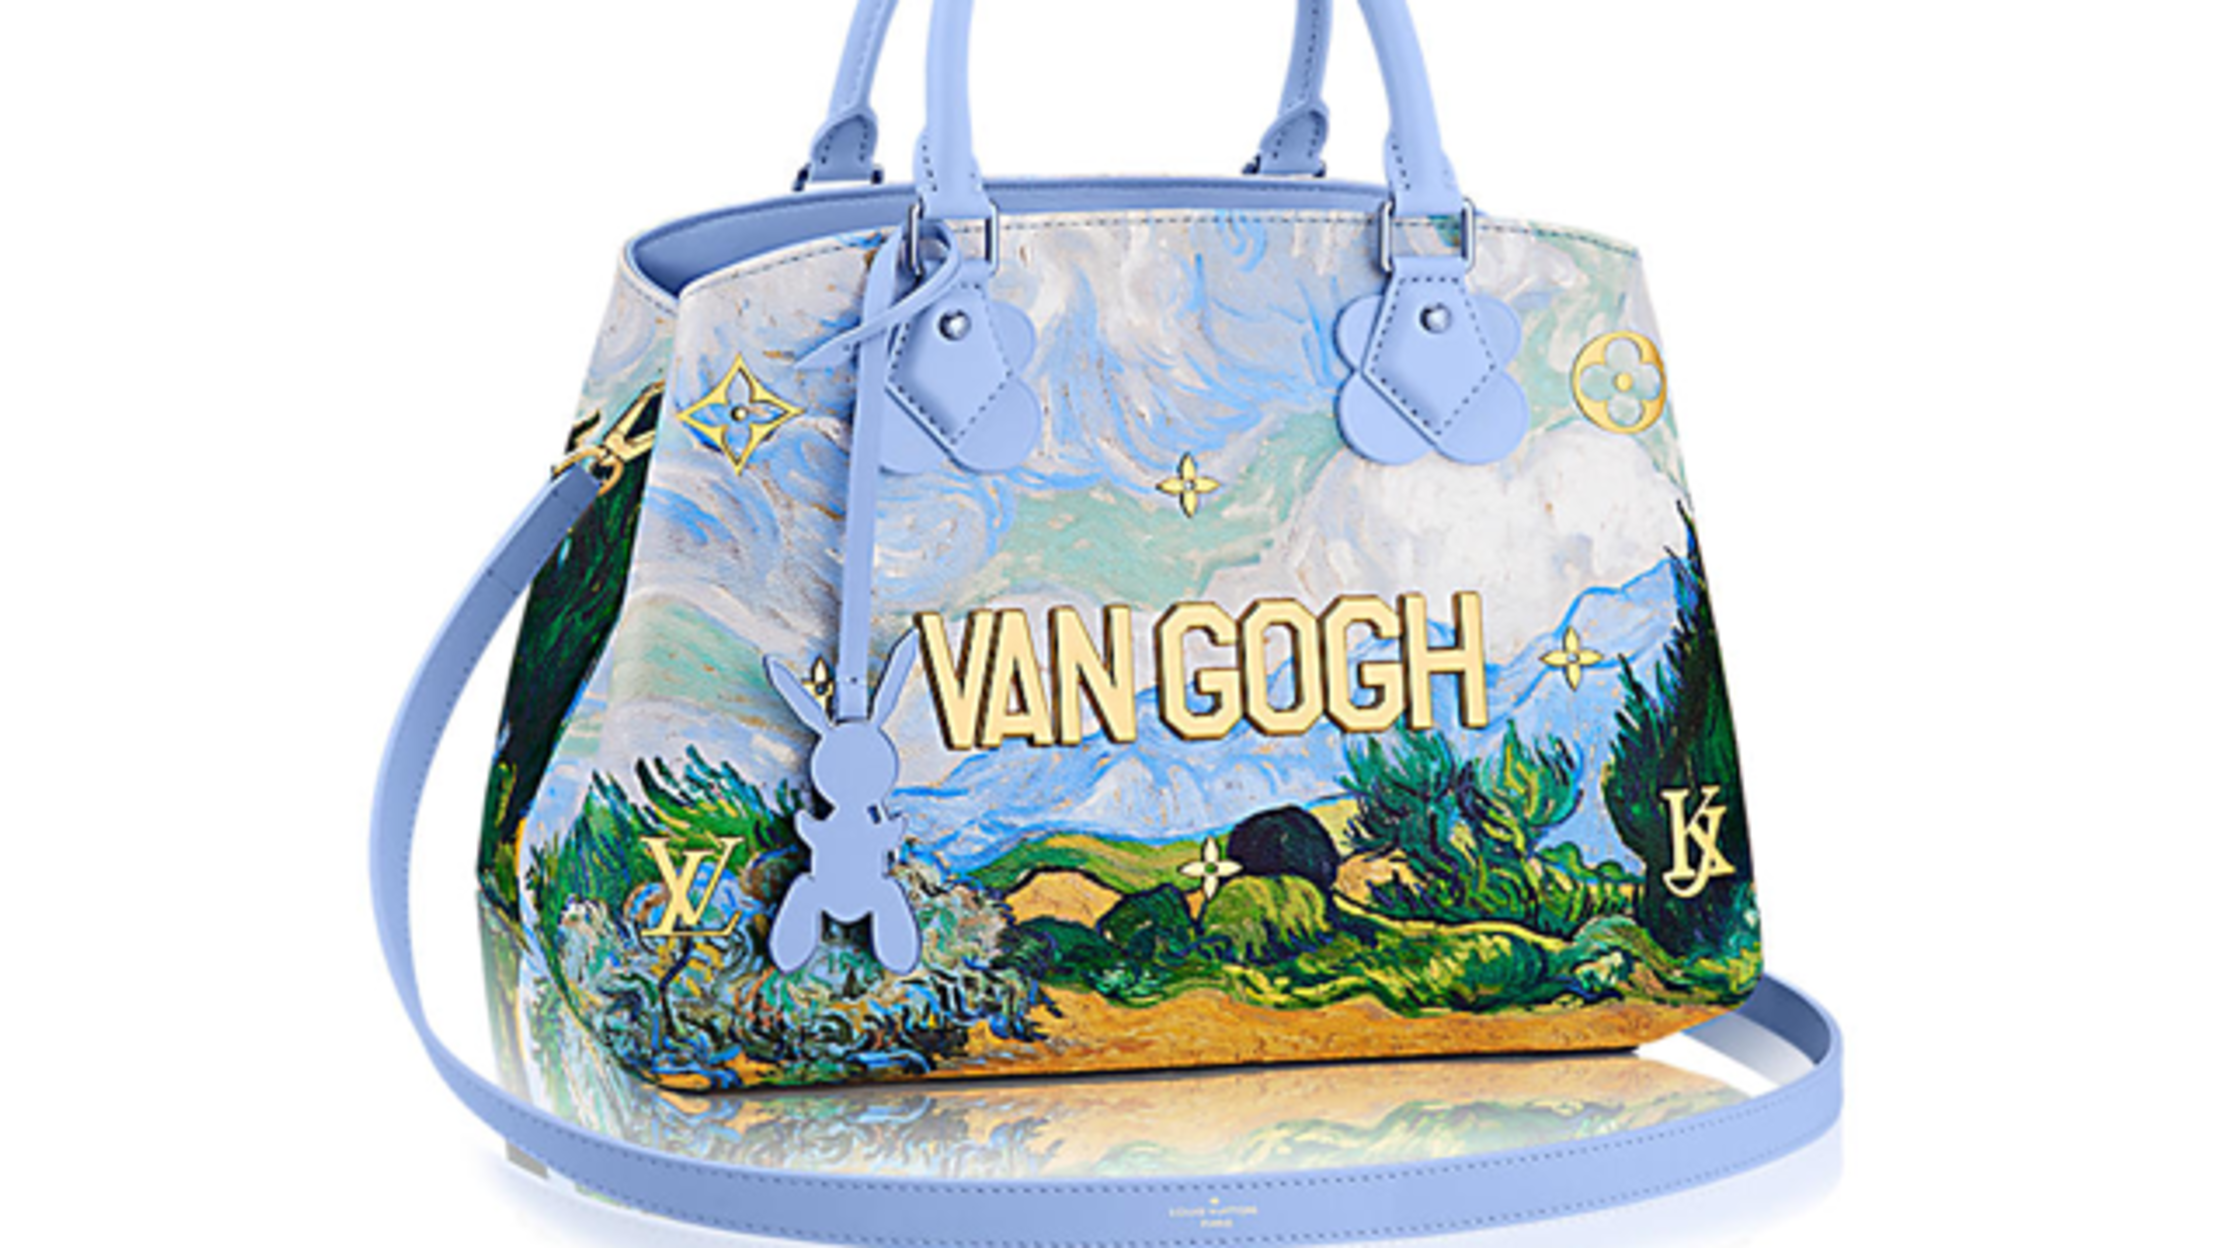 Jeff Koons Teams Up With Louis Vuitton to Create Art-Inspired Handbags | Mental Floss